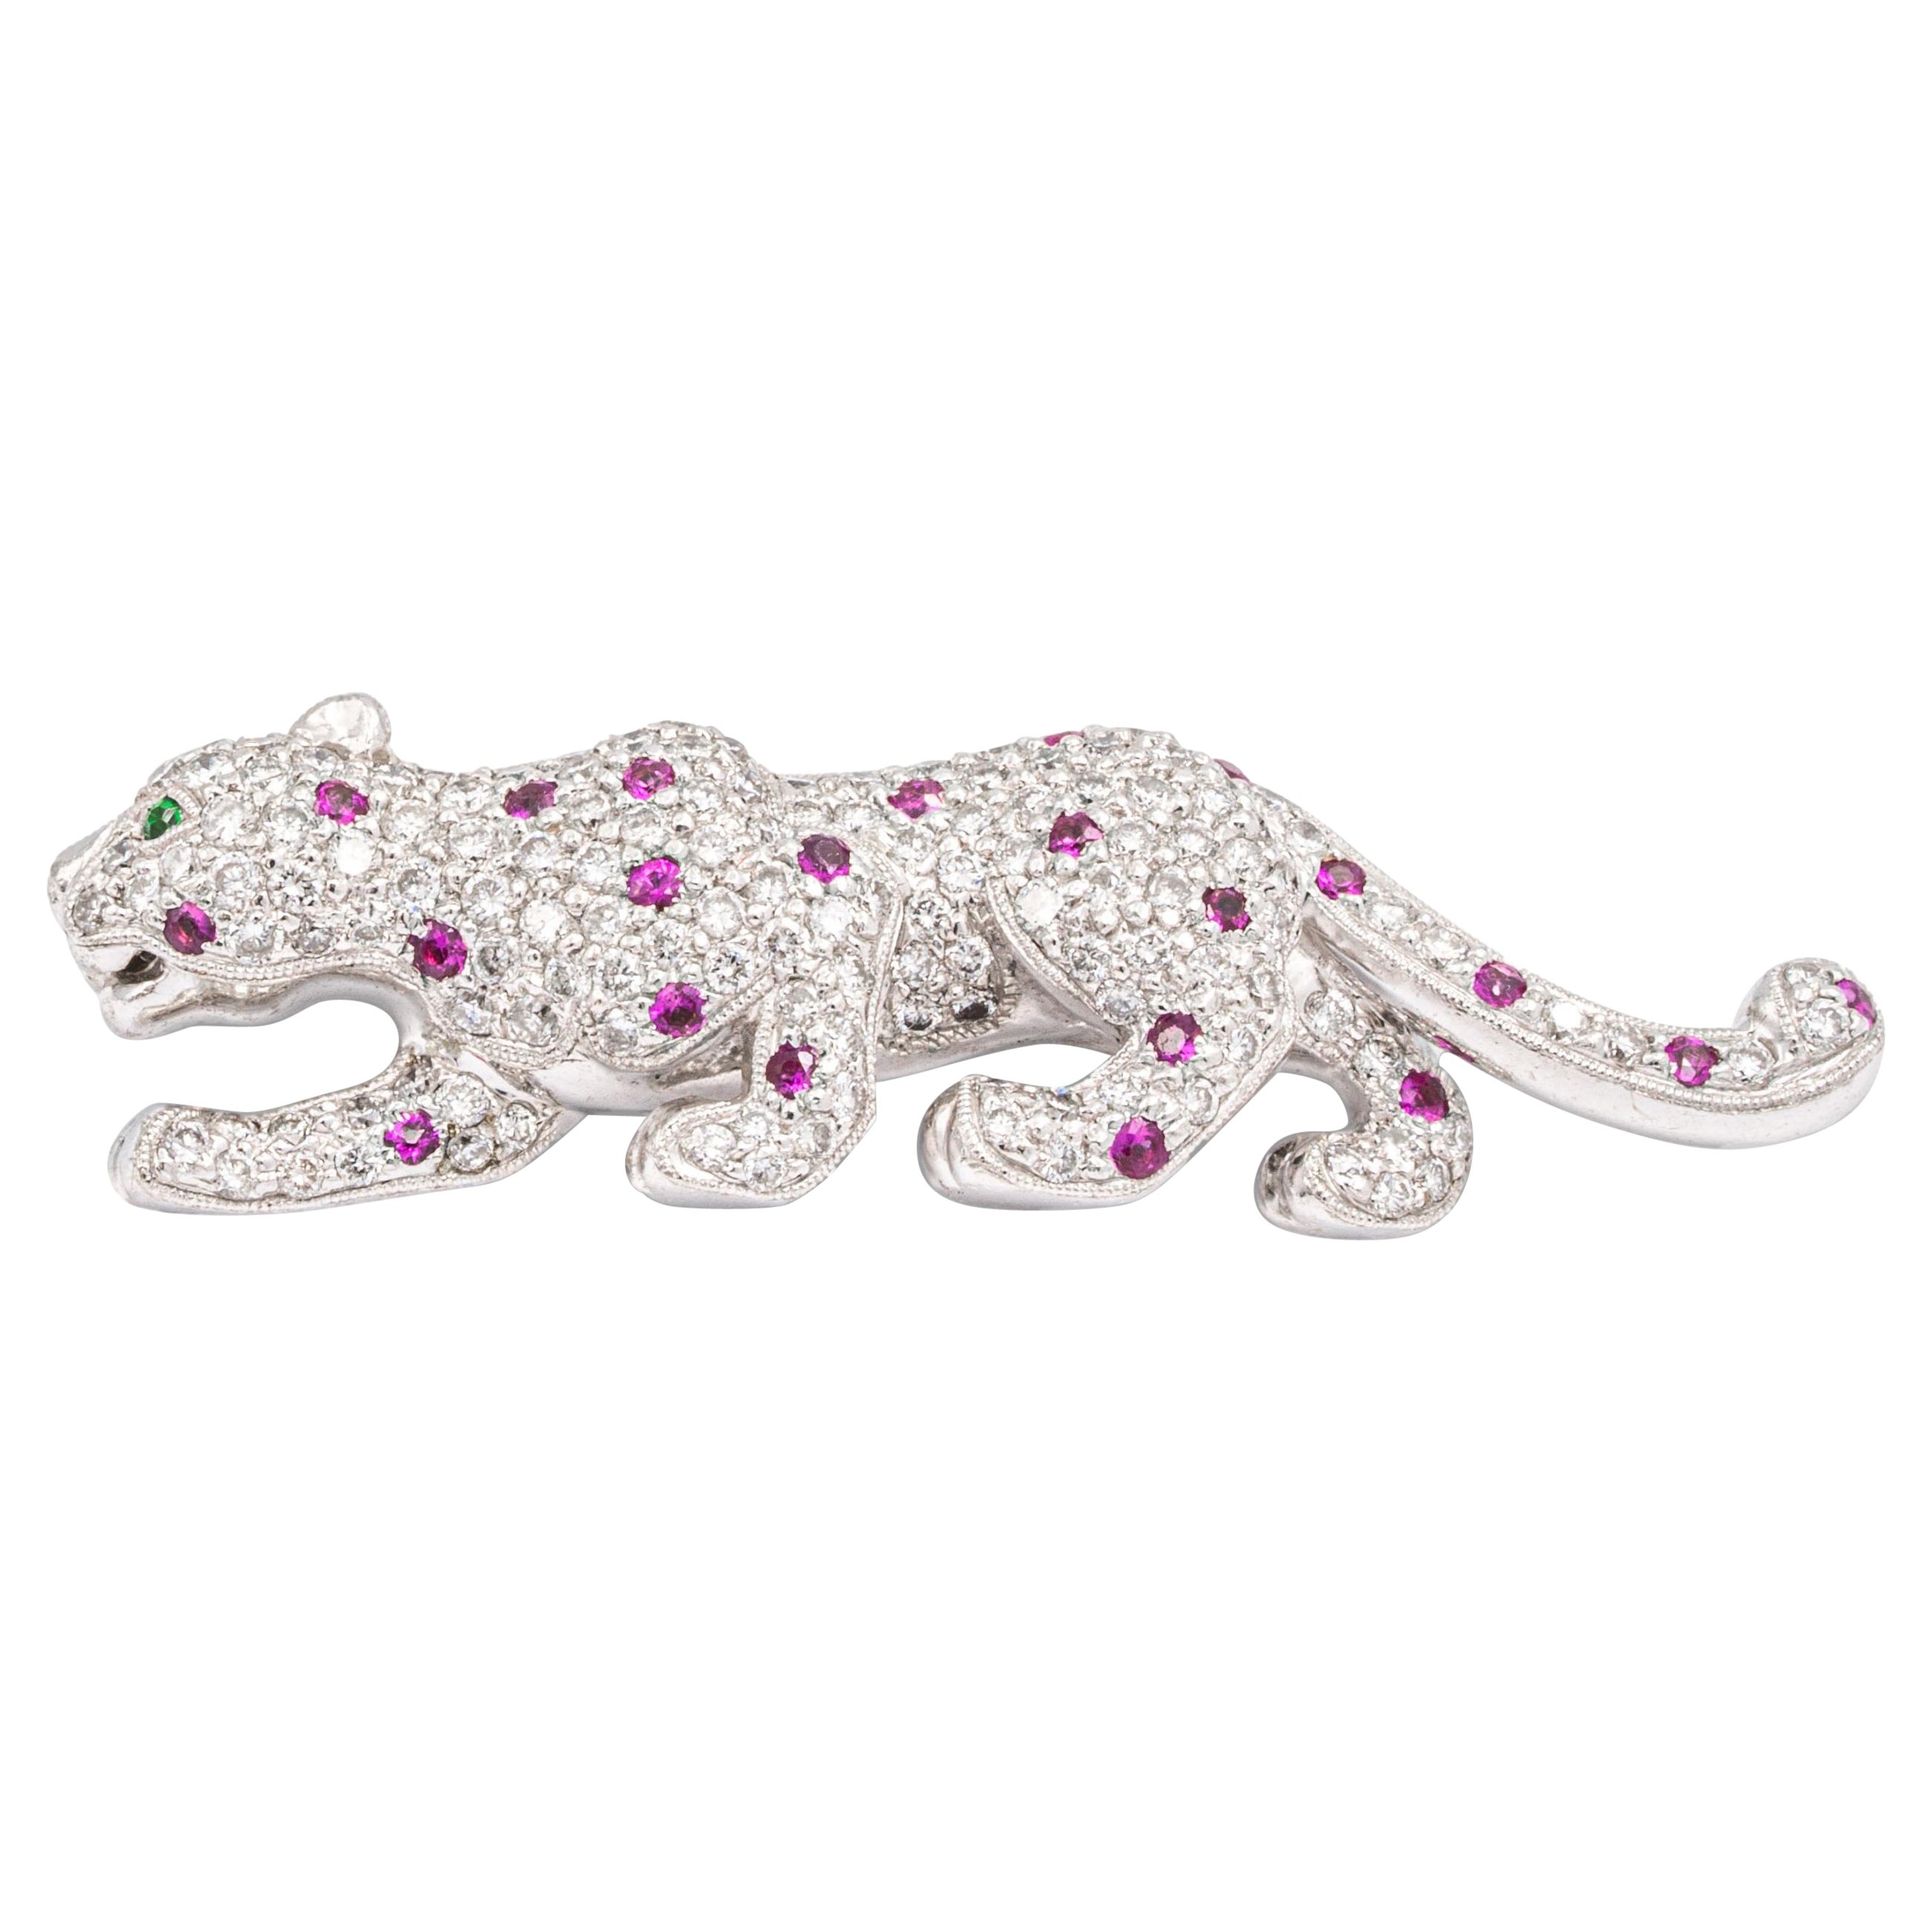 18K White Gold Vintage Panther Brooch with Pave Diamond and Pink Sapphires